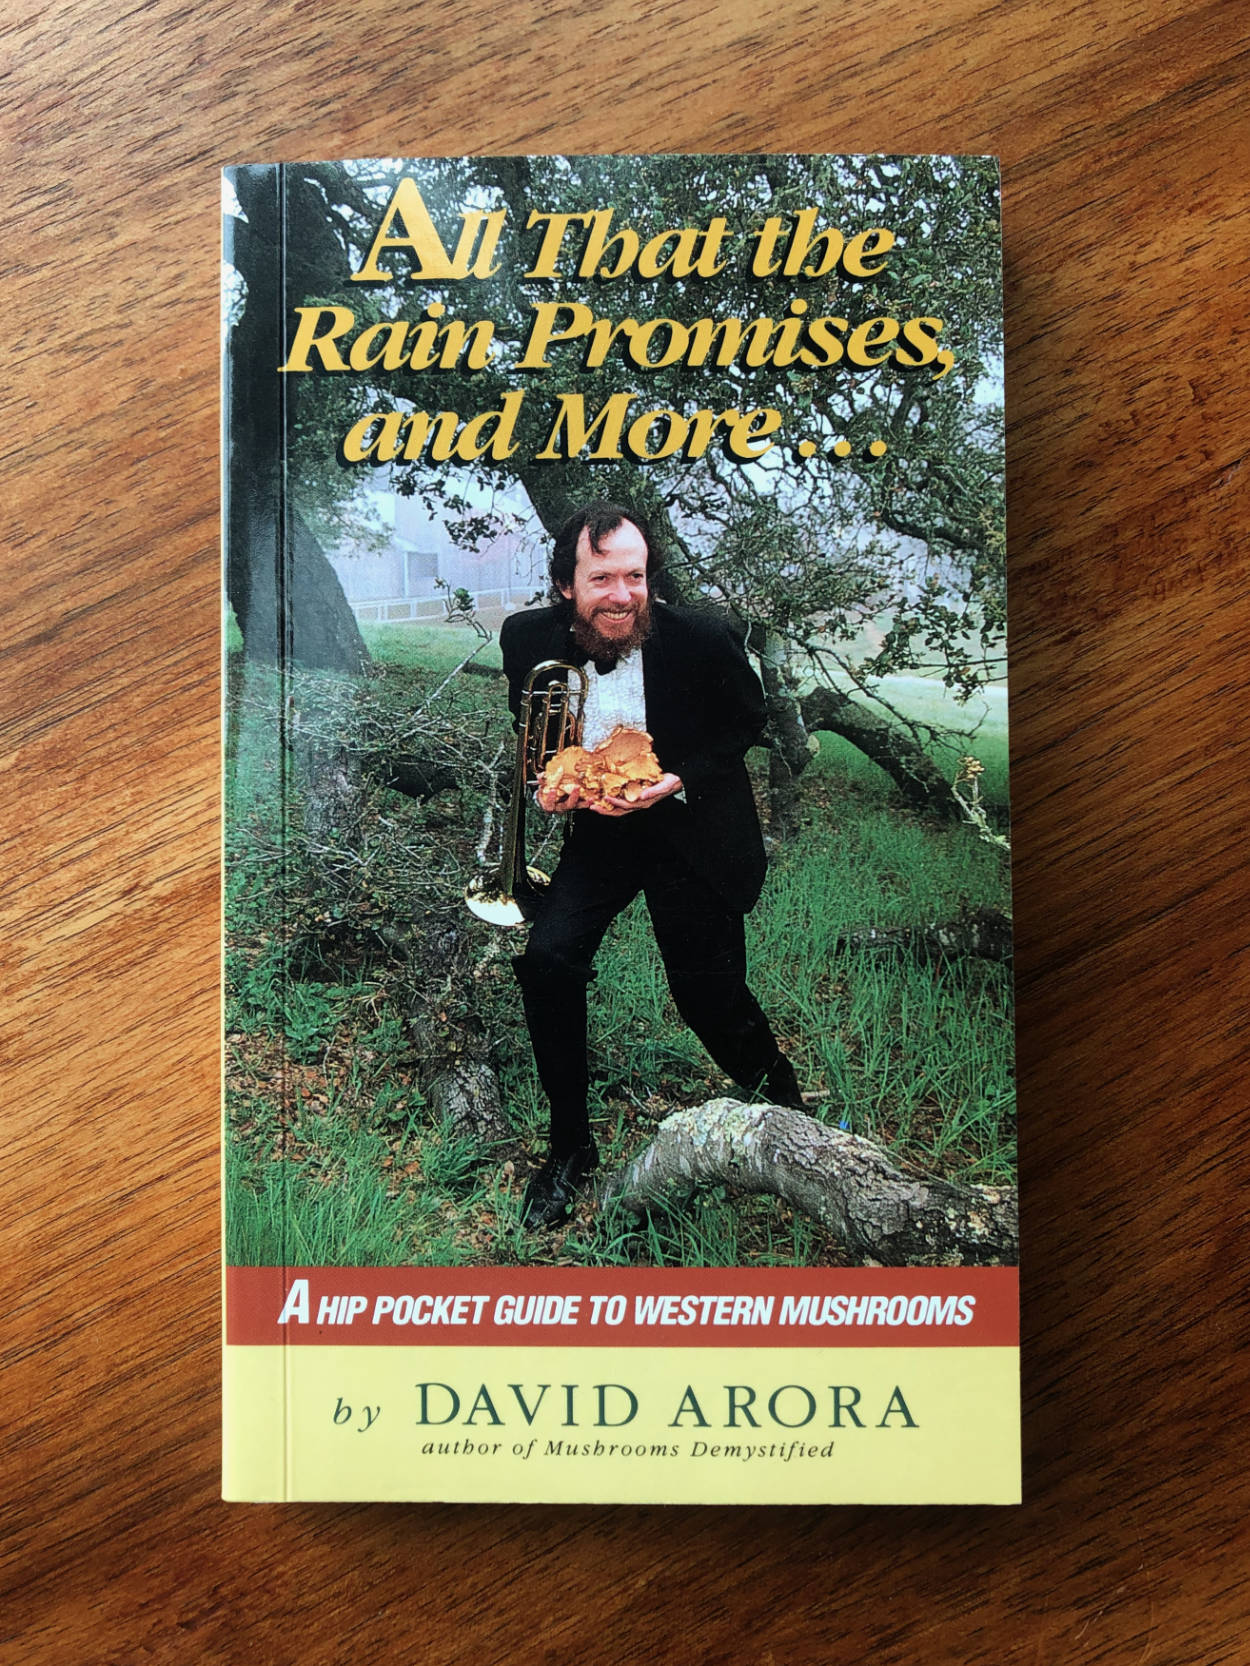 Cover of the book “All That the Rain Promises and More...”